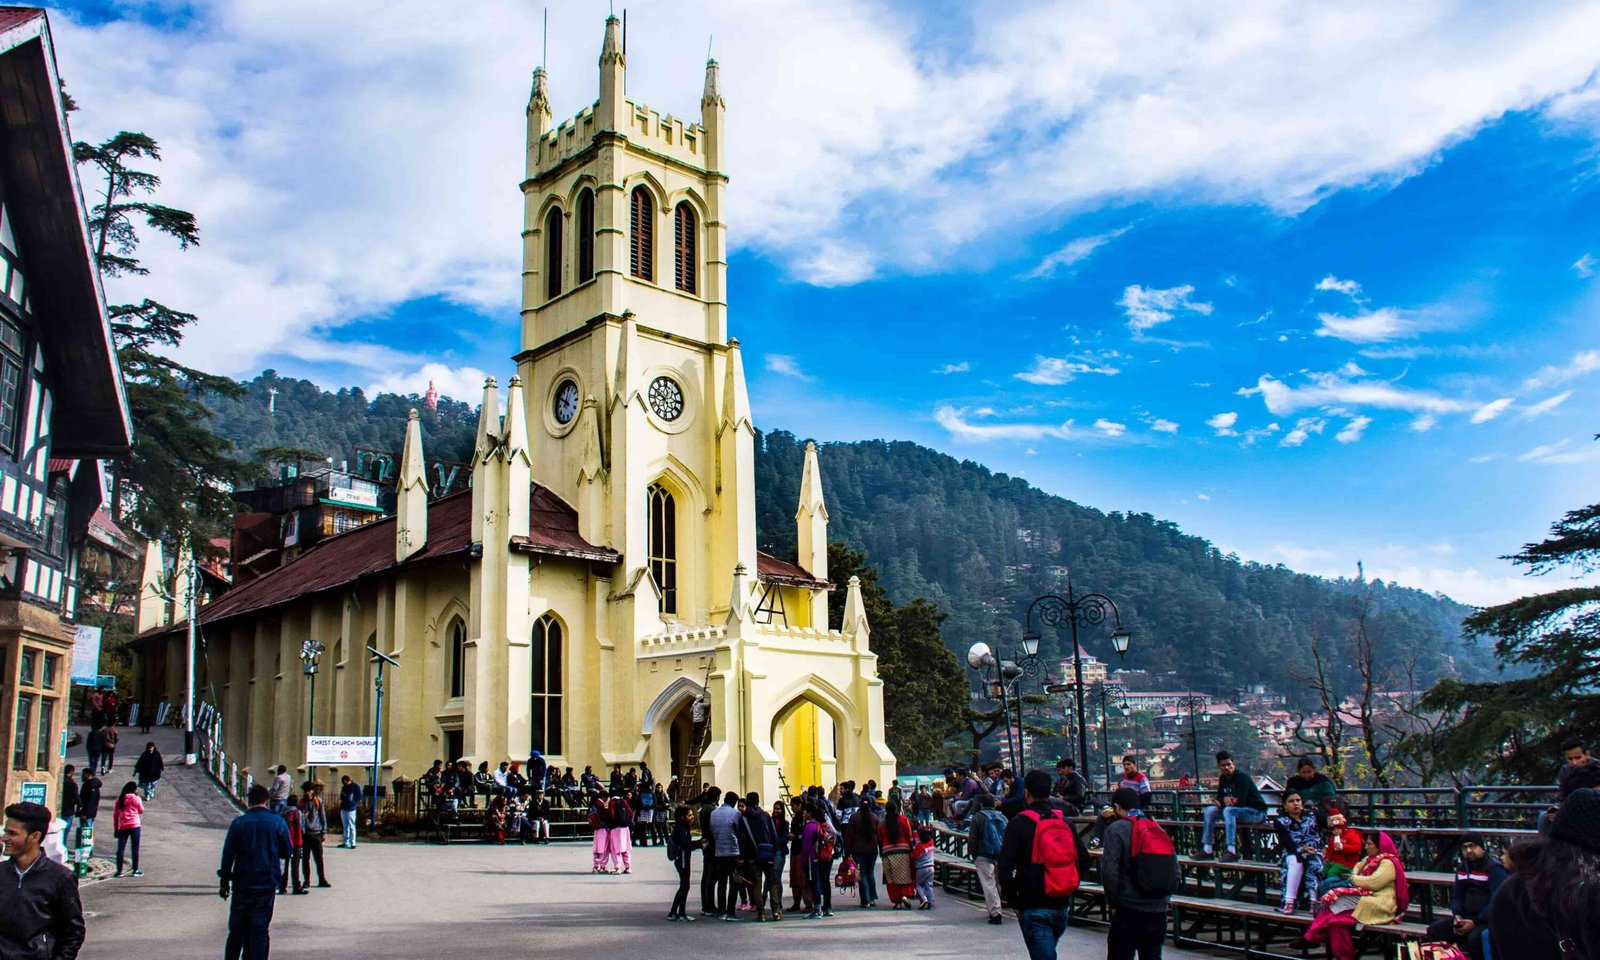 places to visit near shimla within 200 kms